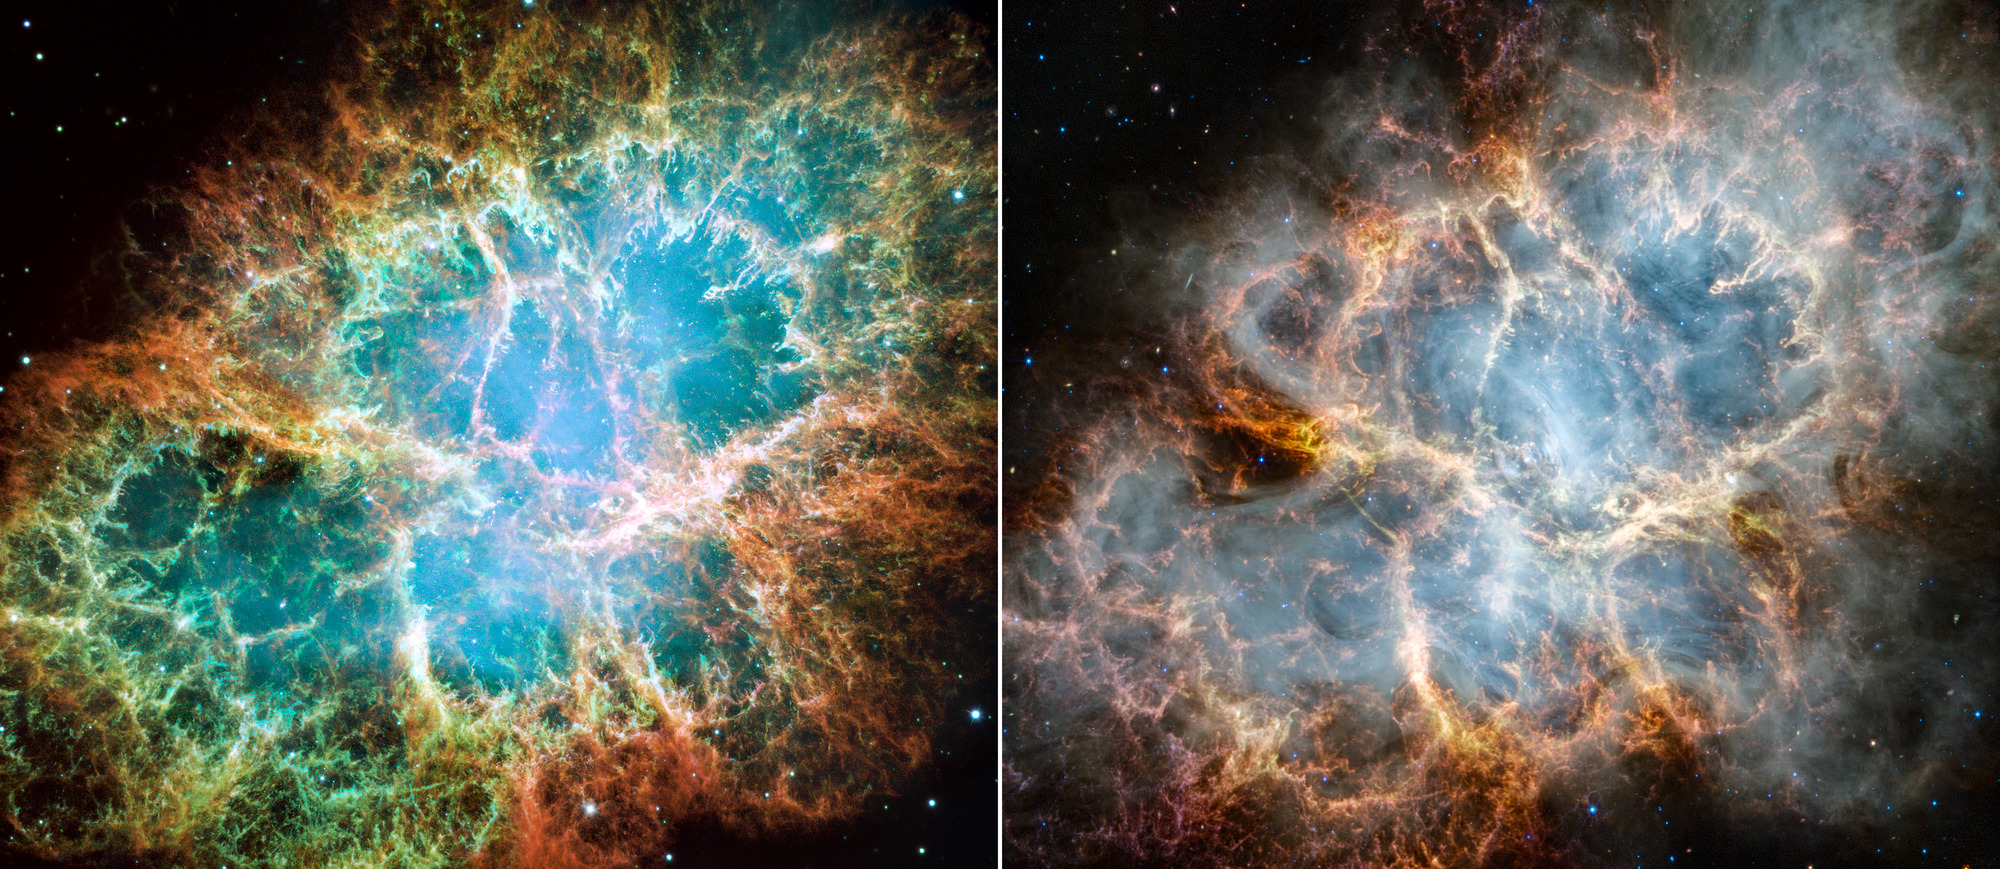 A side-by-side-comparison of the Crab Nebula as seen by the Hubble Space Telescope in optical light (left) and the James Webb Space Telescope in infrared light (right). In both images, the oval nebula’s complex structure lies against a black background. On the nebula’s exterior, particularly at the top left and bottom left, lie curtains of glowing red and orange fluffy material. Interior to this outer shell lie large-scale loops of mottled filaments of yellow-white and green, studded with clumps and knots. In the Hubble image, the central interior of the nebula glows brightly, while the Webb image shows translucent thin ribbons of smoky white in the same area. Around and within the supernova remnant are many points of blue-white light in the Hubble image, and blue, red, and yellow light in the Webb image.